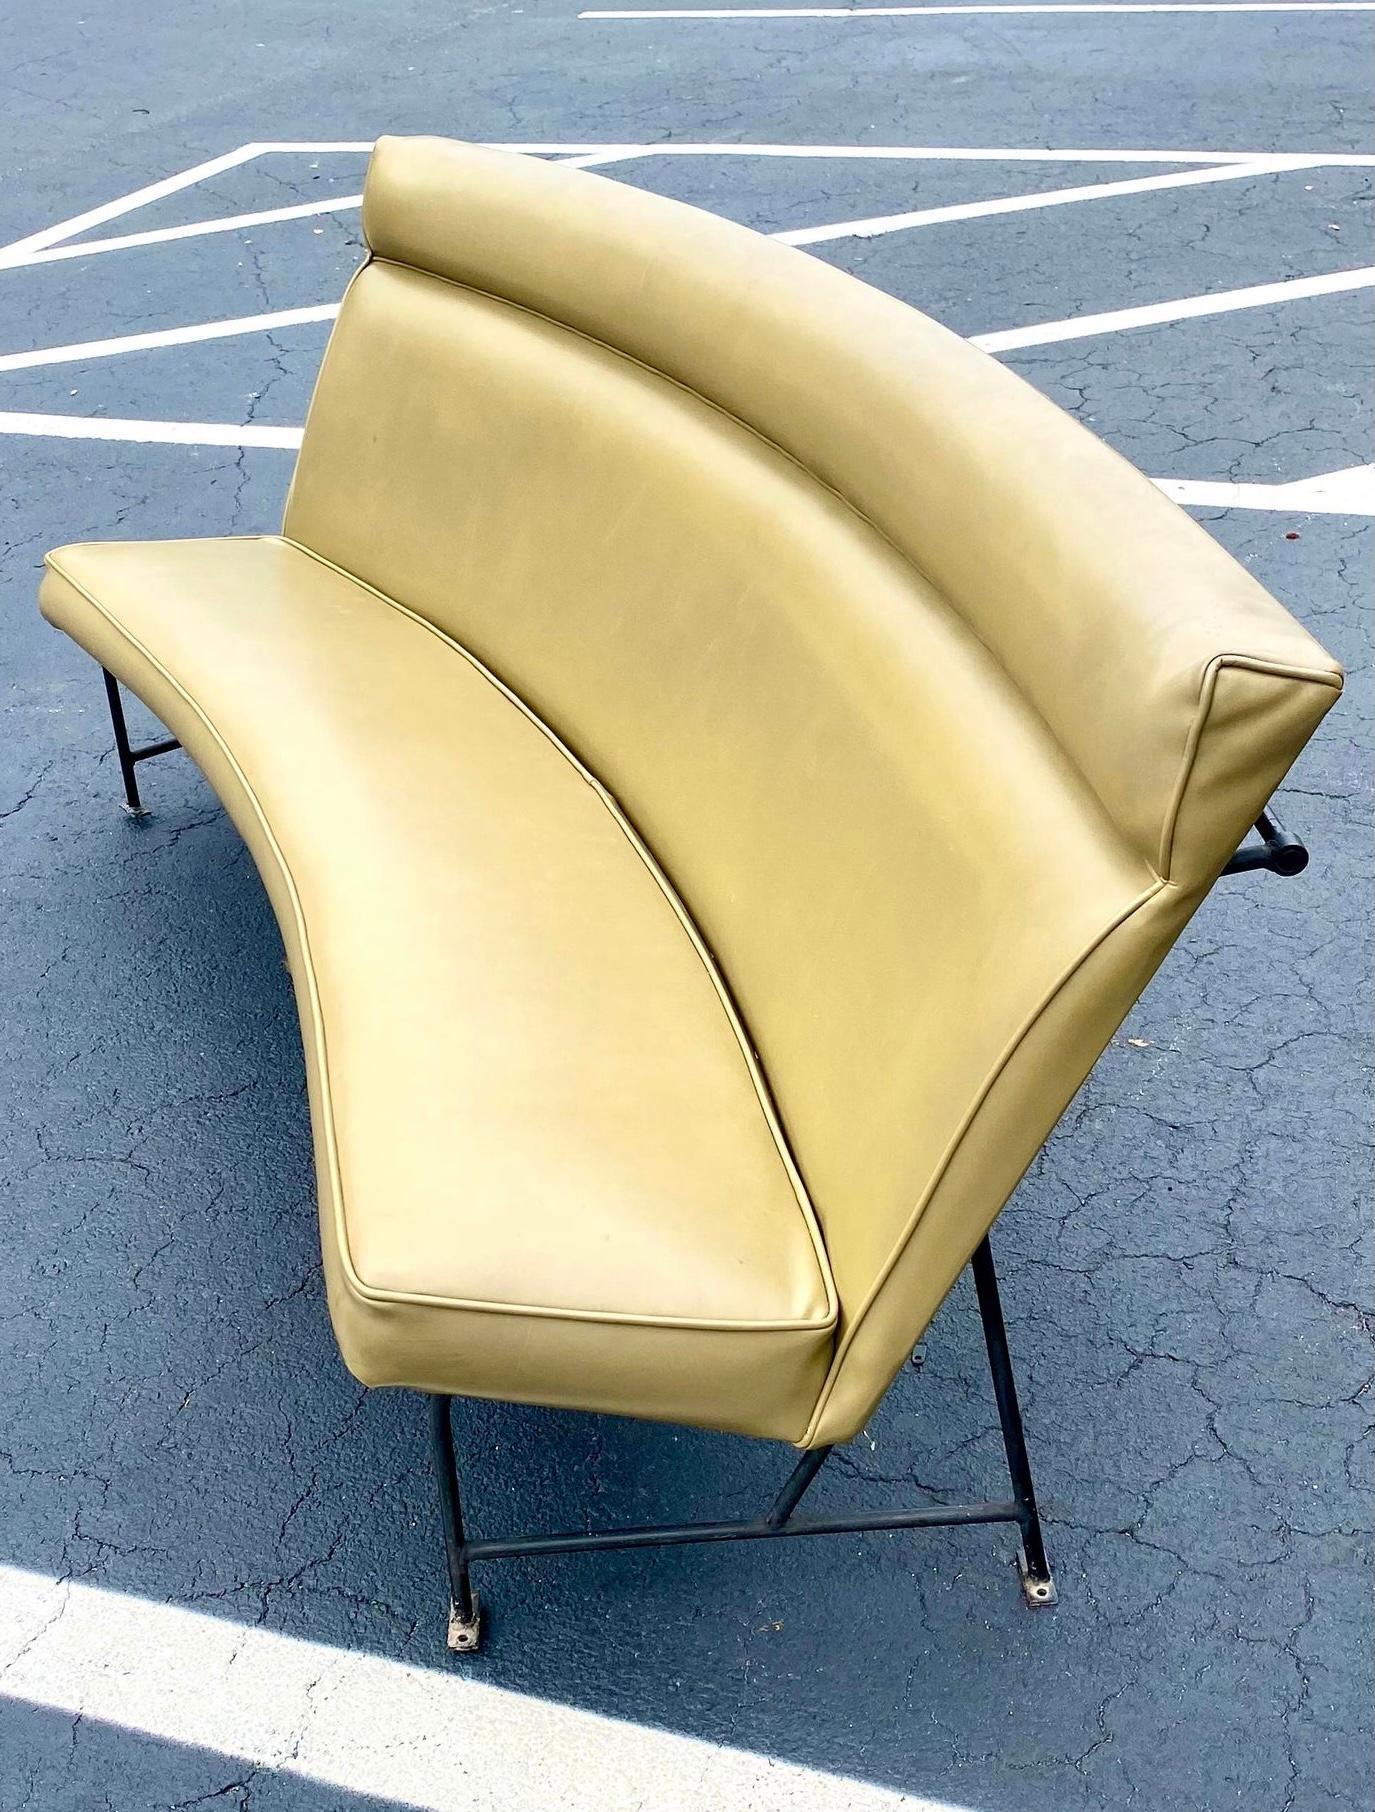 Outstanding Midcentury benched seating. Originally used in the 1966 opening of the Hatter Planetarium at Gettysburg University. Just imagine the new frontiers these benches have seen! Place them in rows for home theater or make them into one